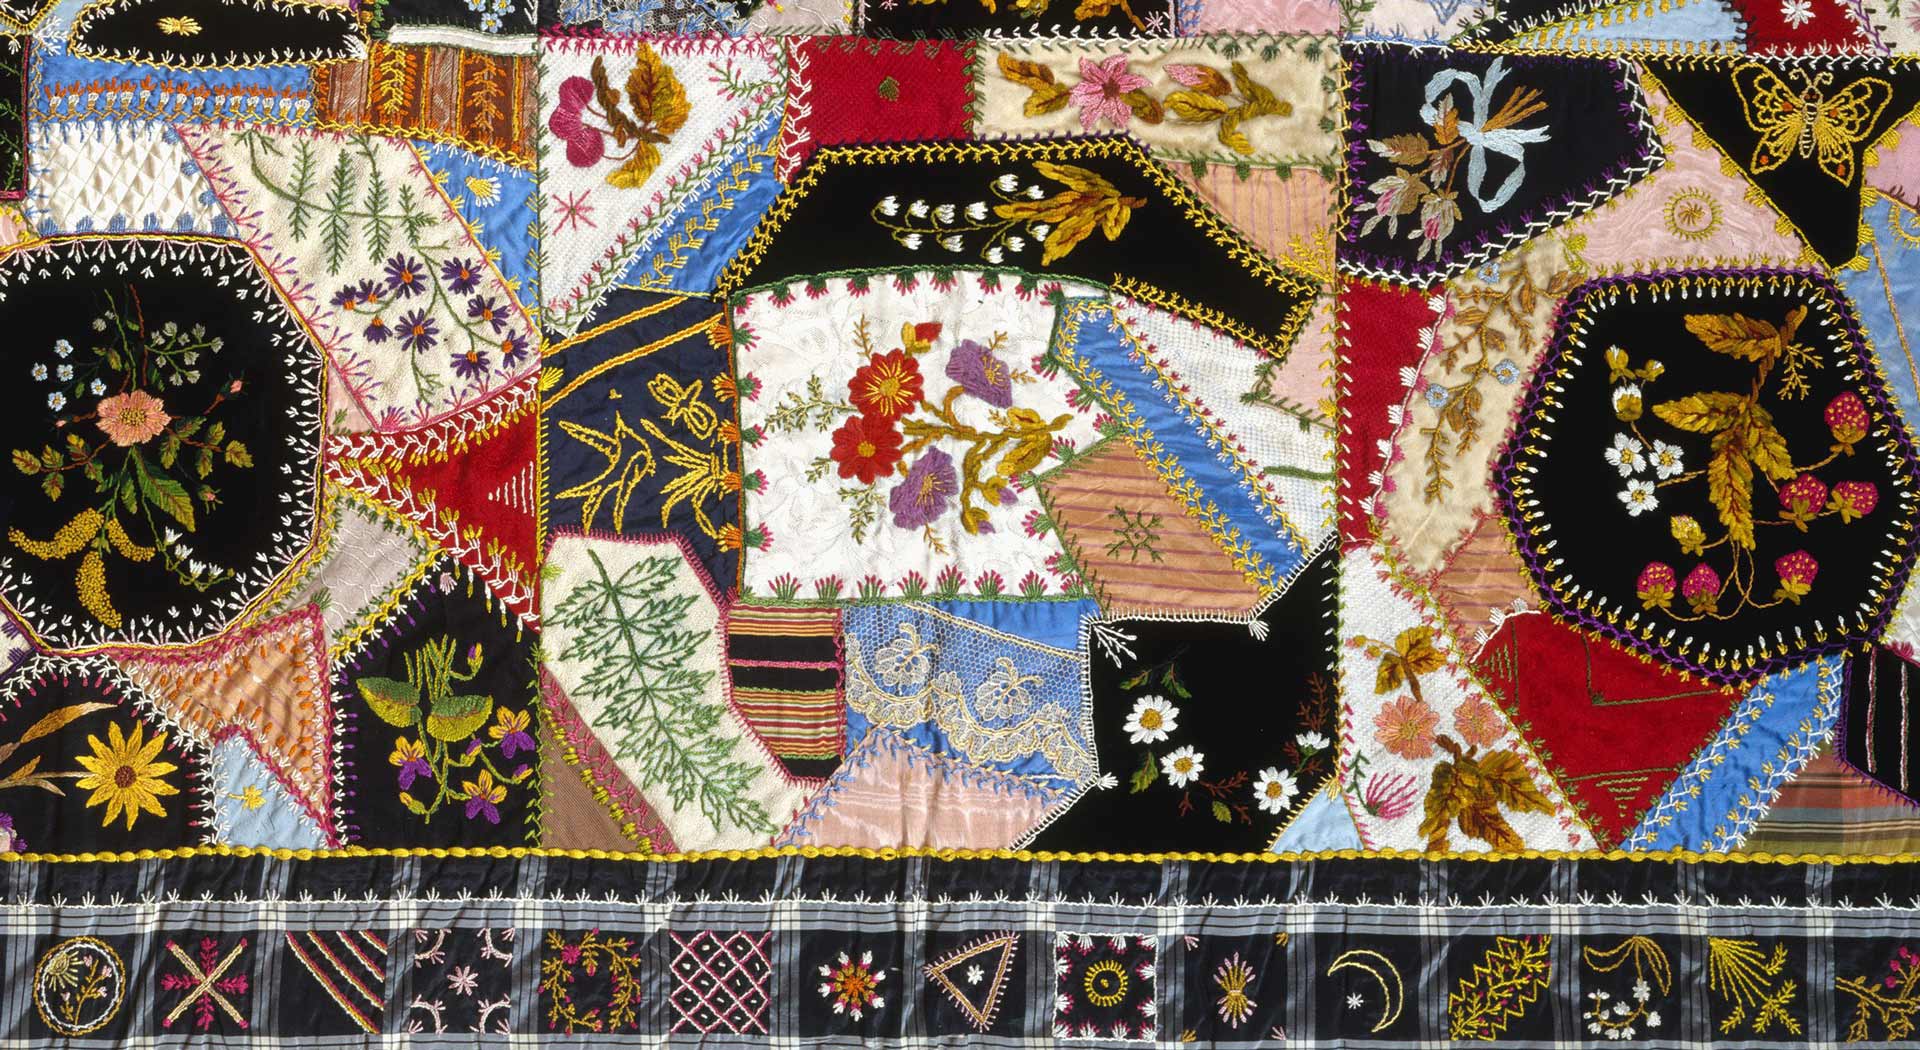 Detail of the above quilt, highlighting the embroidery and exotic stitchwork.